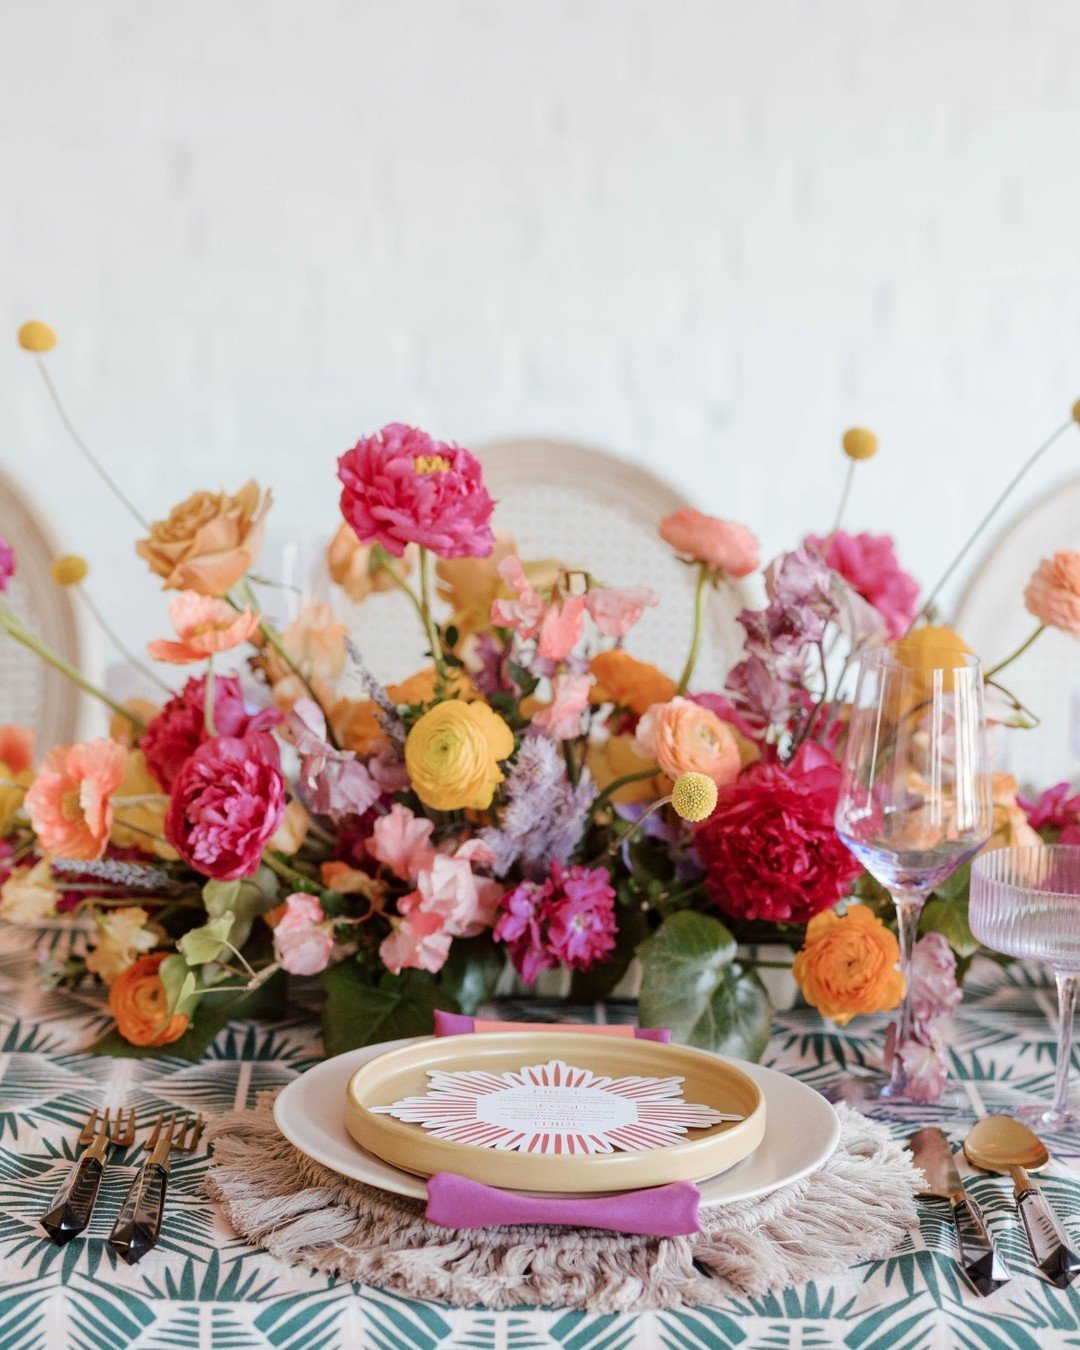 A moment for the tablescapes 🕯🌸🍽 Bold and colorful, or simple and elegant, we're sure to make a statement on your wedding day. Which tablescape style is your favorite? ⁠
⁠
Venue @styledandstagedstl⁠
Photographer @_tammicamp⁠
Florals @anaffairtorem